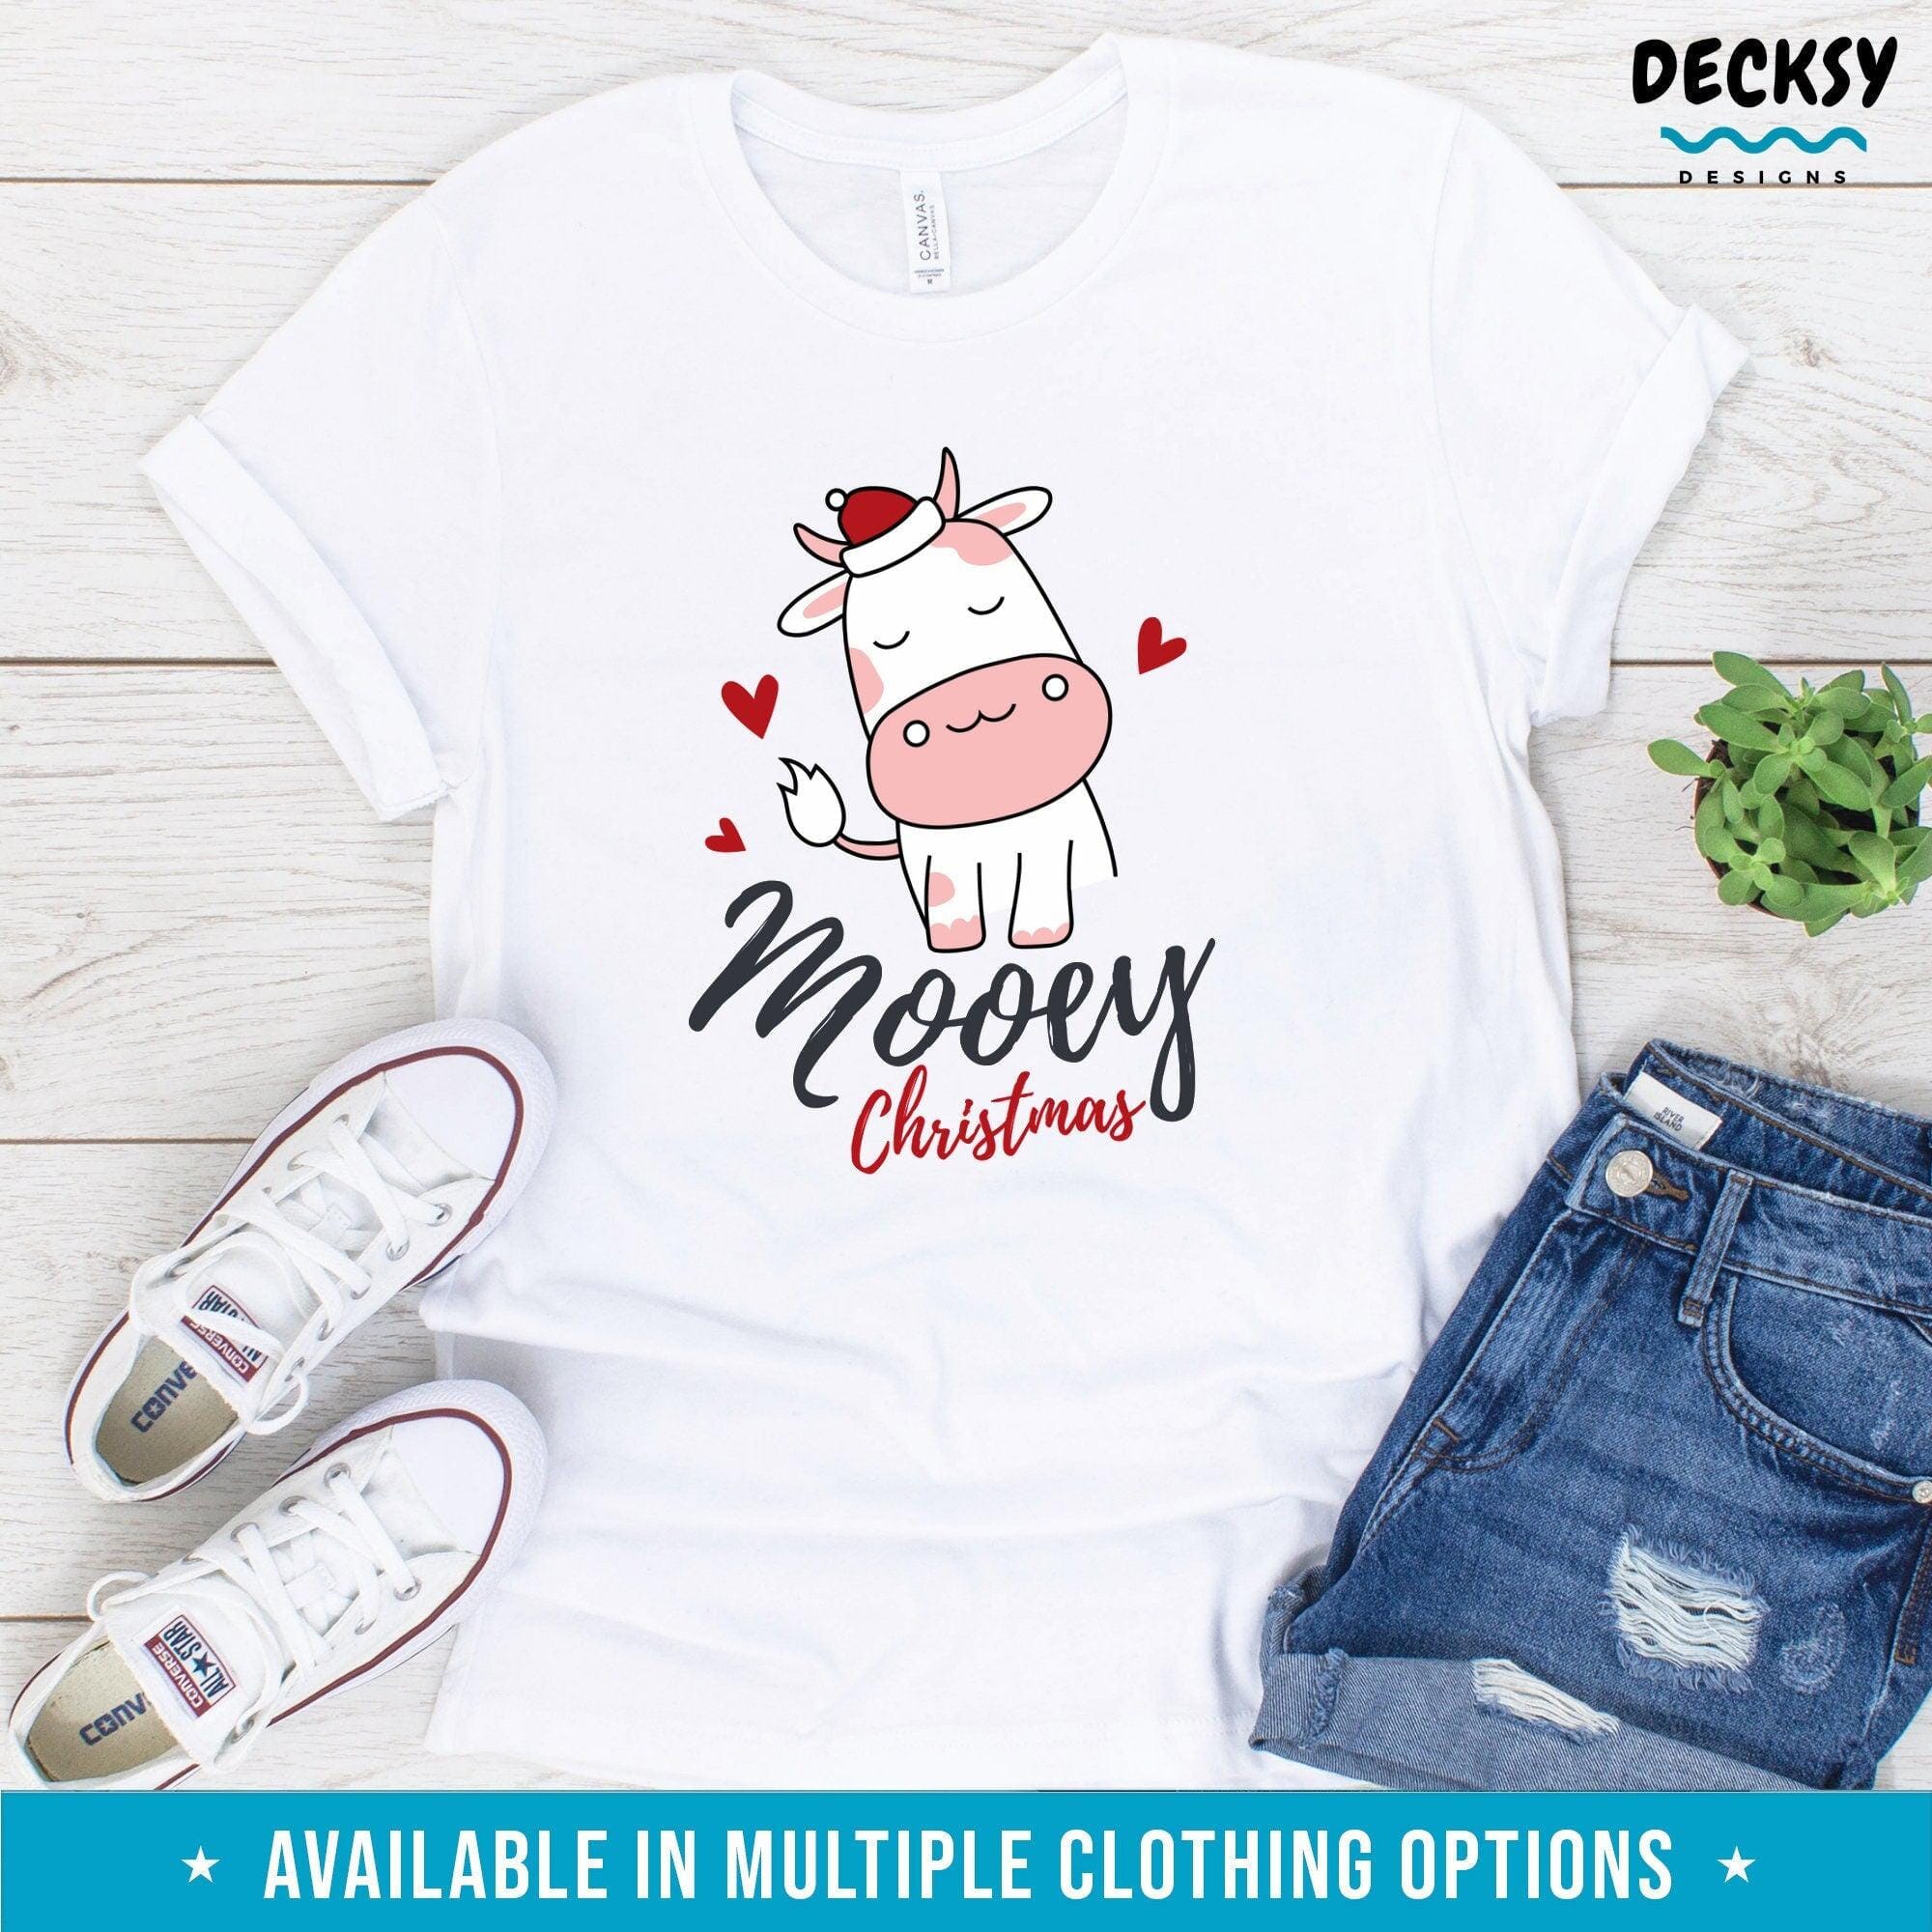 Cow Christmas Shirt, Mooey Christmas Gift-Clothing:Gender-Neutral Adult Clothing:Tops & Tees:T-shirts:Graphic Tees-DecksyDesigns